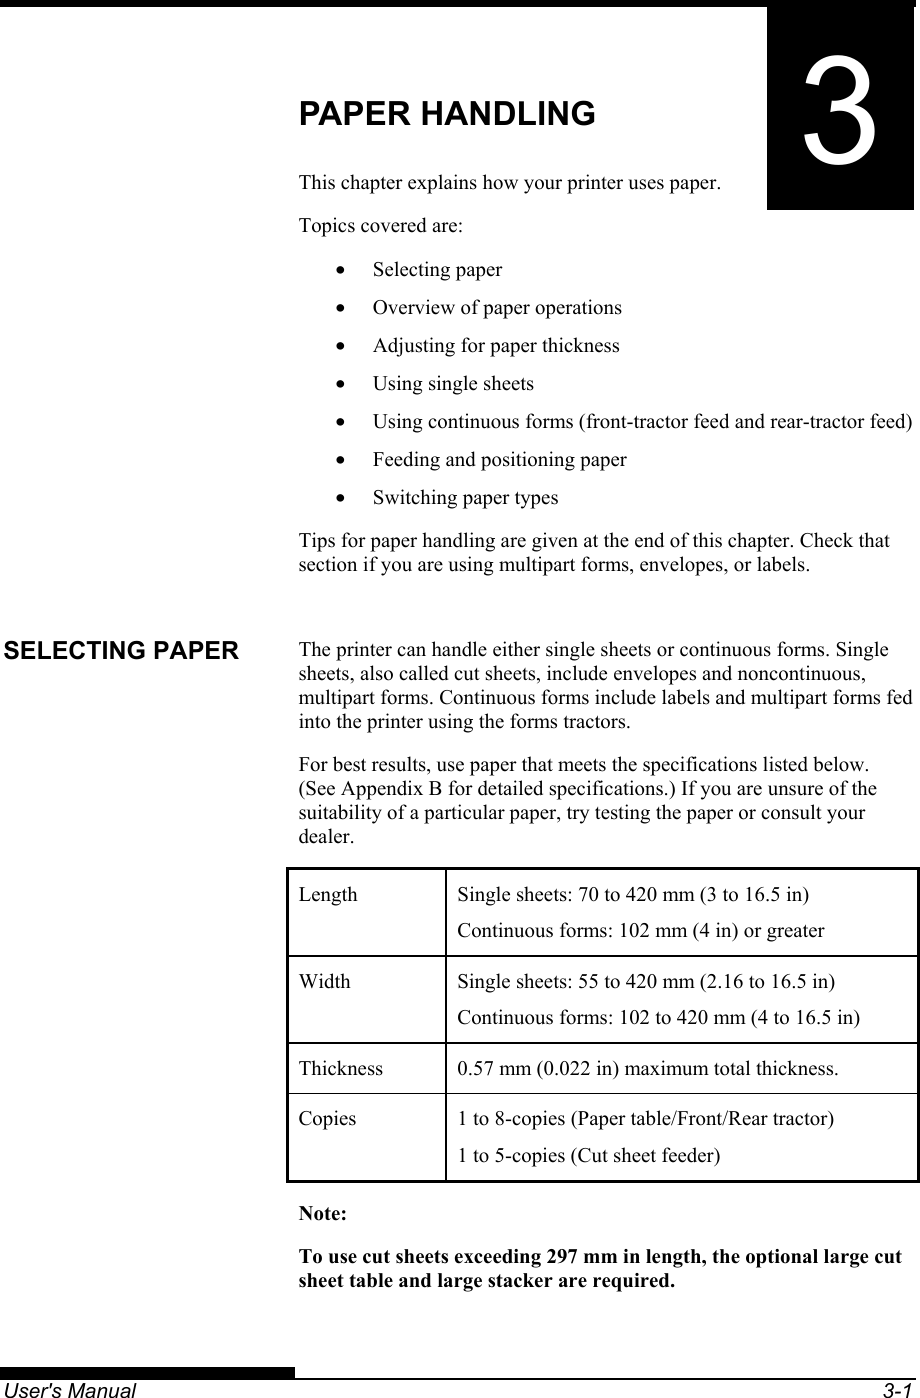   User&apos;s Manual  3-1 3CHAPTER 3  PAPER HANDLING PAPER HANDLING This chapter explains how your printer uses paper. Topics covered are: • Selecting paper •  Overview of paper operations •  Adjusting for paper thickness •  Using single sheets •  Using continuous forms (front-tractor feed and rear-tractor feed) •  Feeding and positioning paper •  Switching paper types Tips for paper handling are given at the end of this chapter. Check that section if you are using multipart forms, envelopes, or labels.  The printer can handle either single sheets or continuous forms. Single sheets, also called cut sheets, include envelopes and noncontinuous, multipart forms. Continuous forms include labels and multipart forms fed into the printer using the forms tractors. For best results, use paper that meets the specifications listed below.  (See Appendix B for detailed specifications.) If you are unsure of the suitability of a particular paper, try testing the paper or consult your dealer. Length  Single sheets: 70 to 420 mm (3 to 16.5 in) Continuous forms: 102 mm (4 in) or greater Width  Single sheets: 55 to 420 mm (2.16 to 16.5 in) Continuous forms: 102 to 420 mm (4 to 16.5 in) Thickness  0.57 mm (0.022 in) maximum total thickness. Copies  1 to 8-copies (Paper table/Front/Rear tractor) 1 to 5-copies (Cut sheet feeder) Note: To use cut sheets exceeding 297 mm in length, the optional large cut sheet table and large stacker are required.  SELECTING PAPER 